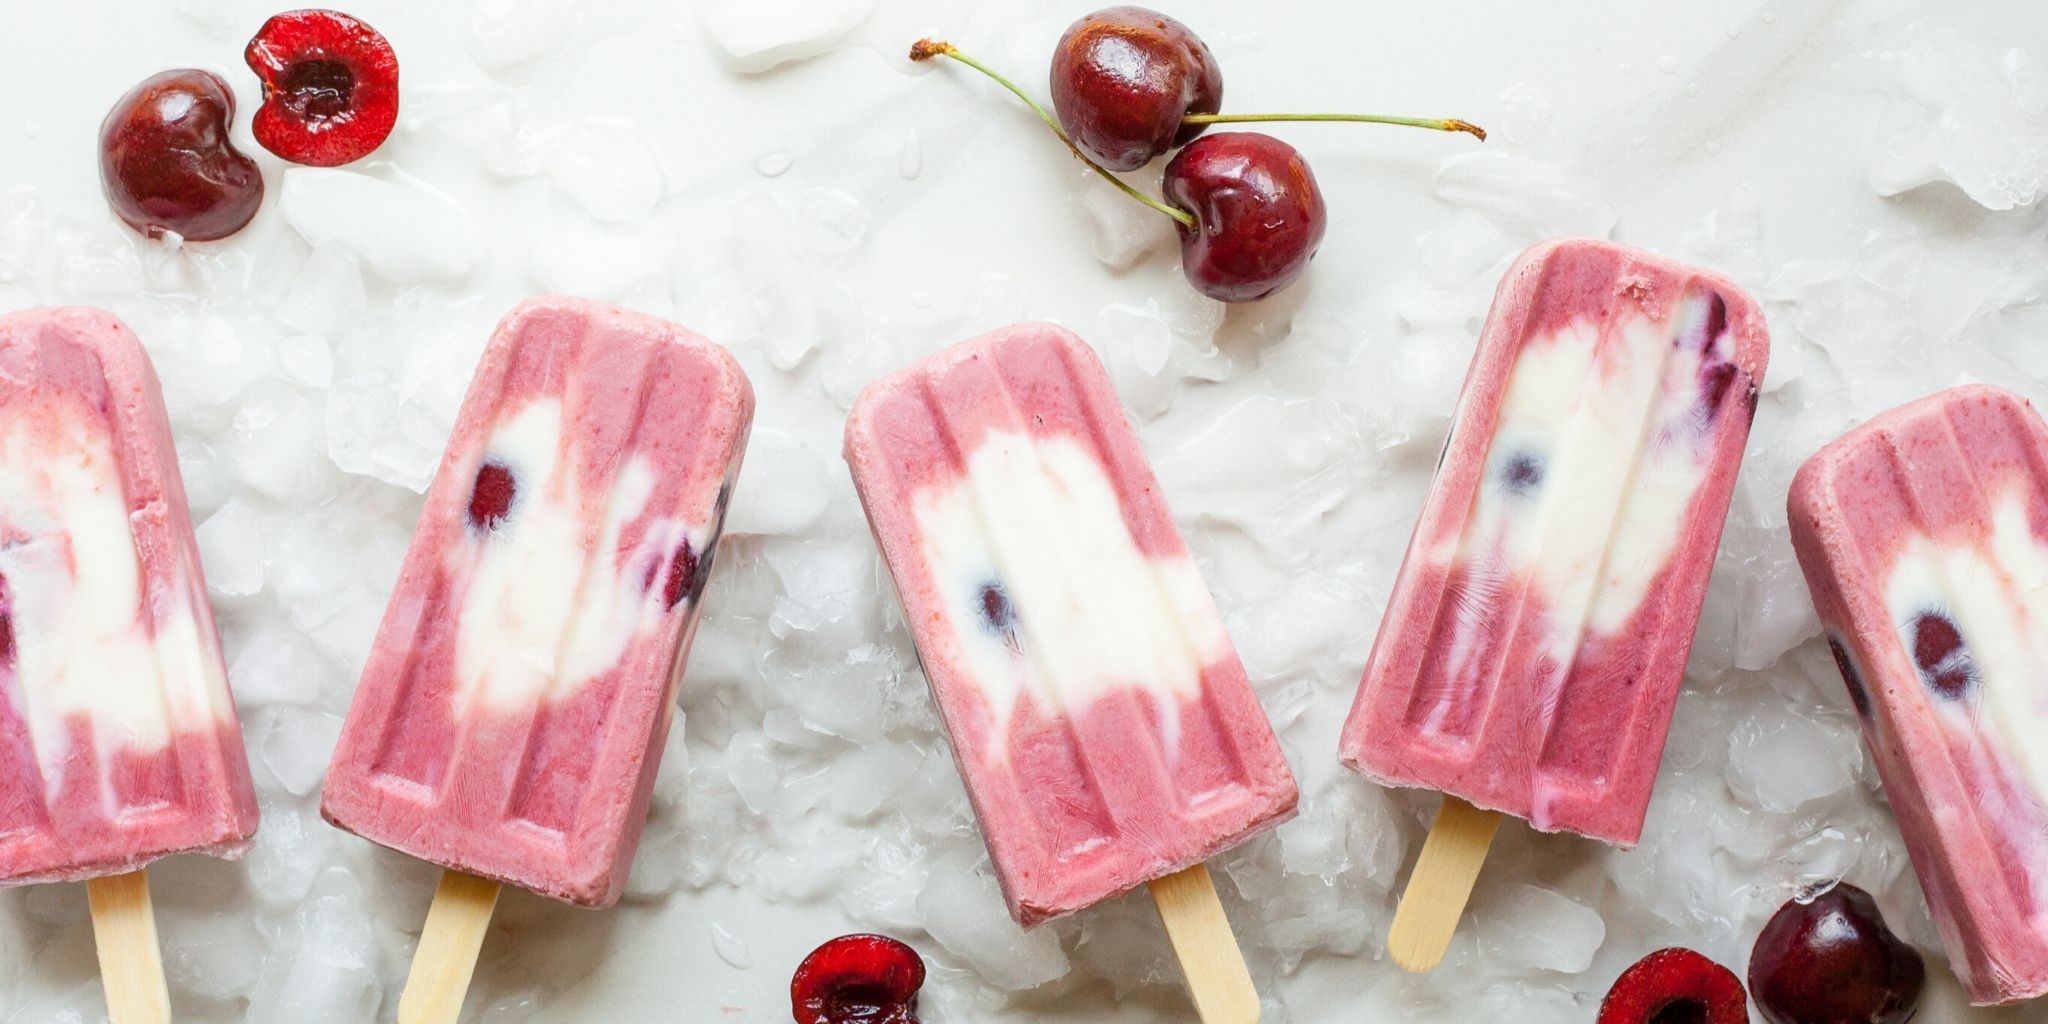 How To Store Homemade Popsicles